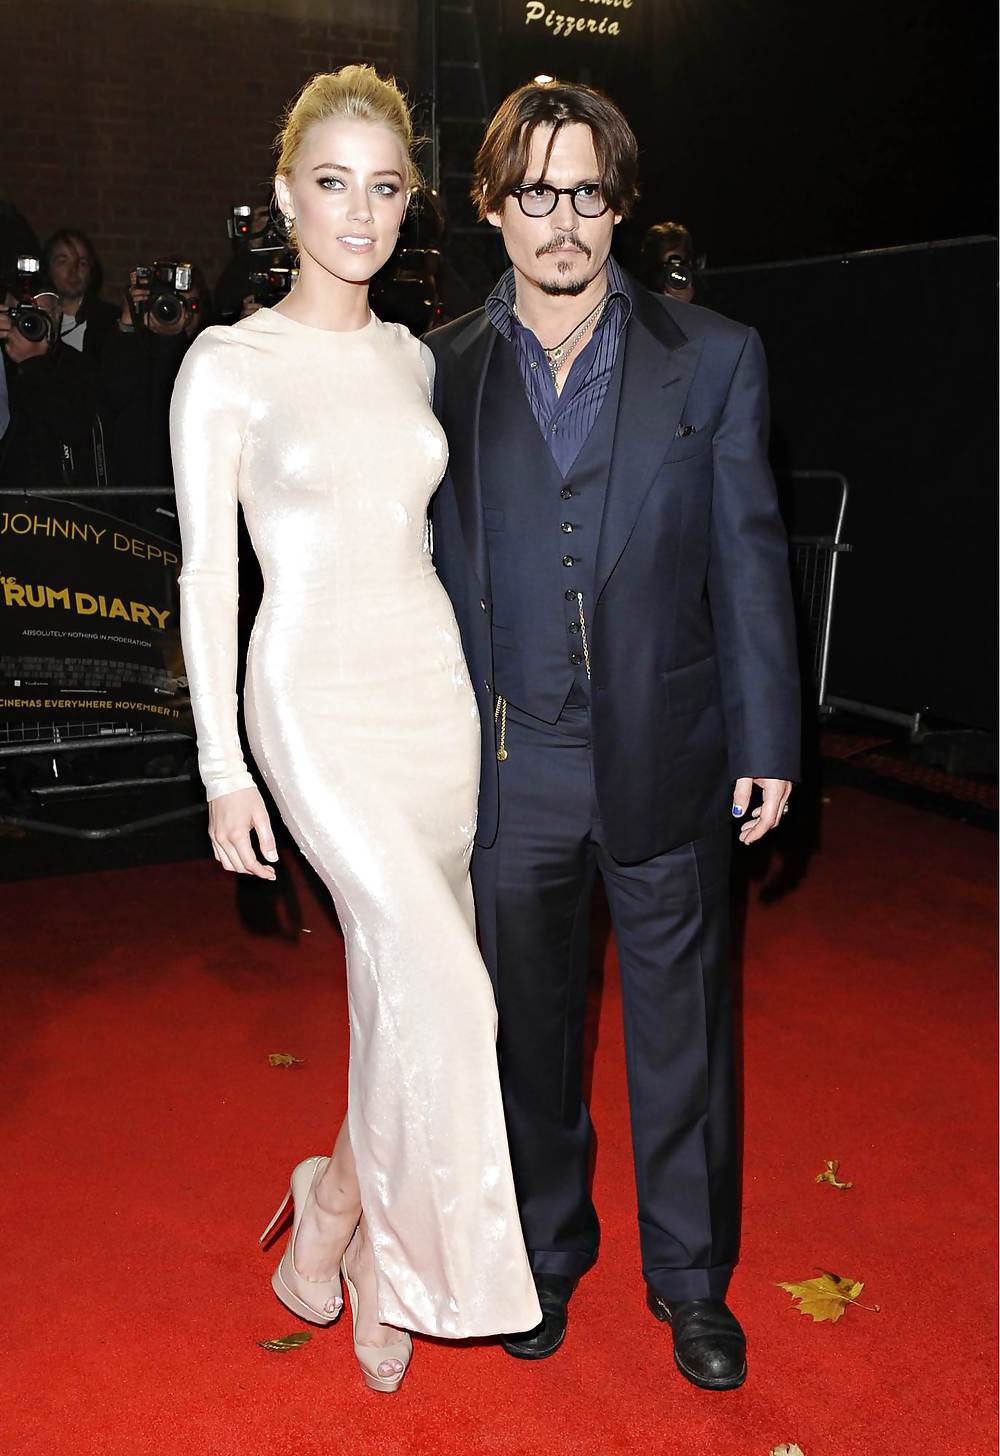 Amber Heard - The Rum Diary premiere in London #9832541